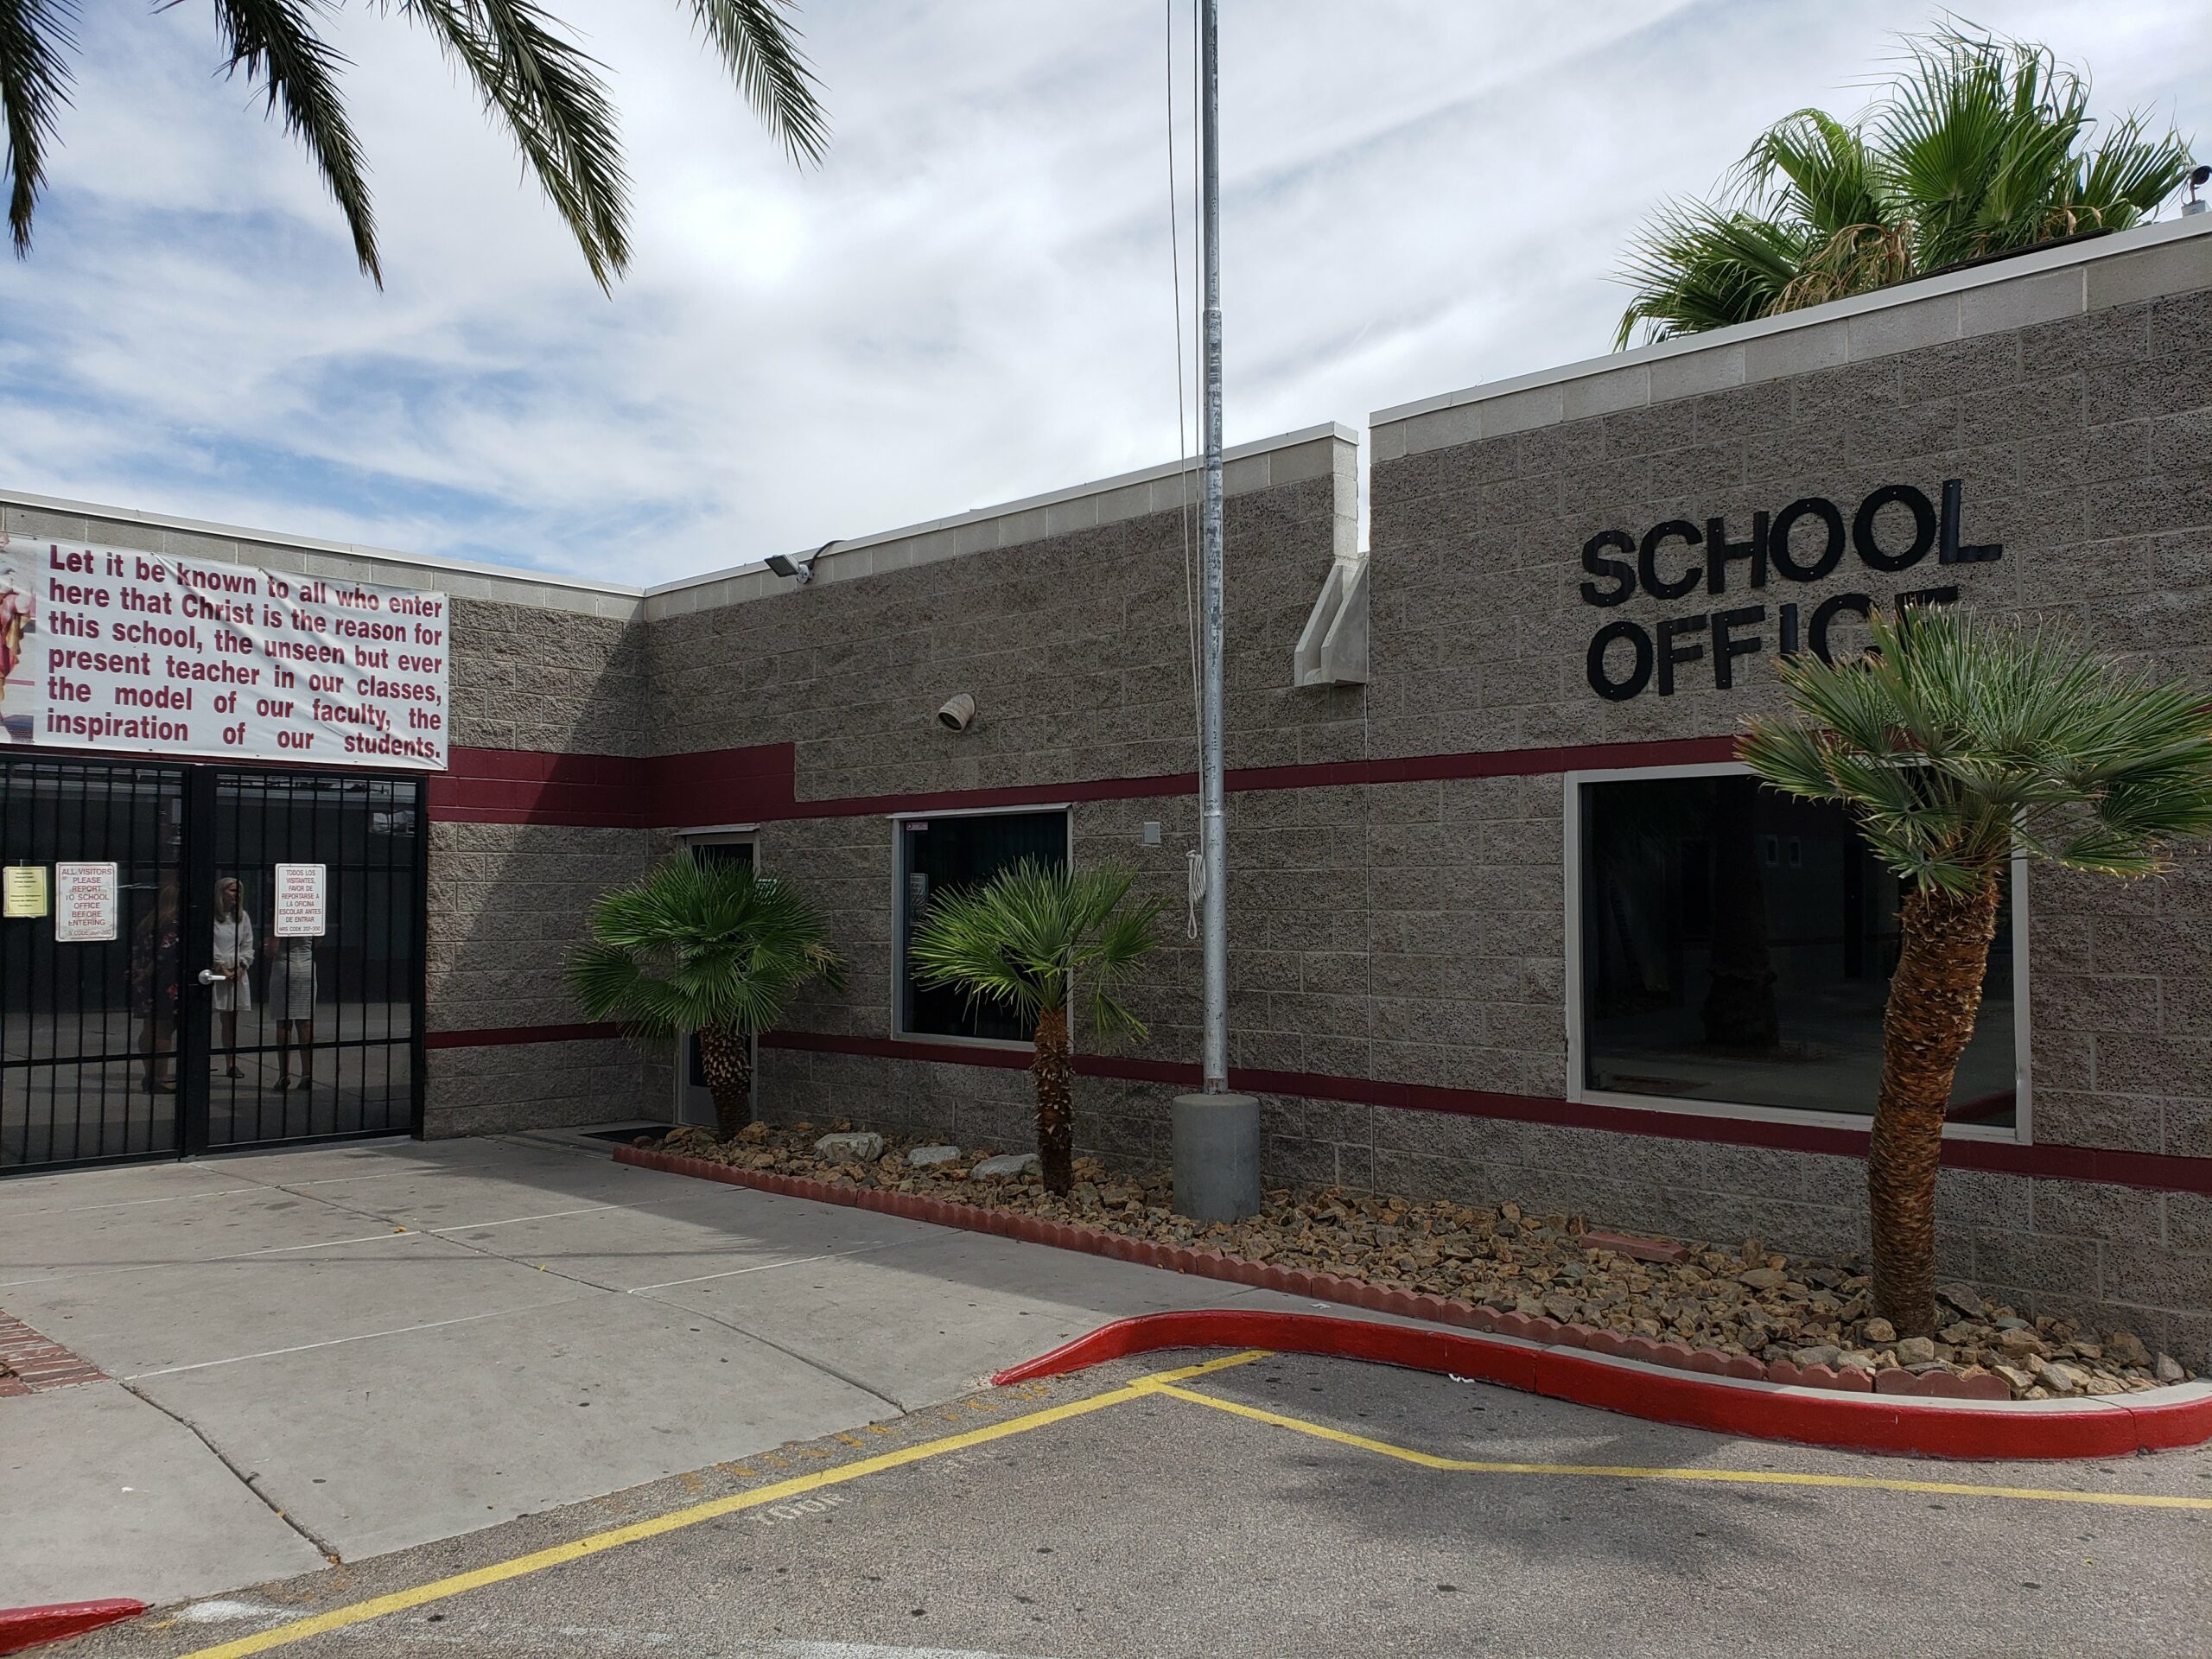 The front of the St. Christopher Catholic School building in Las Vegas